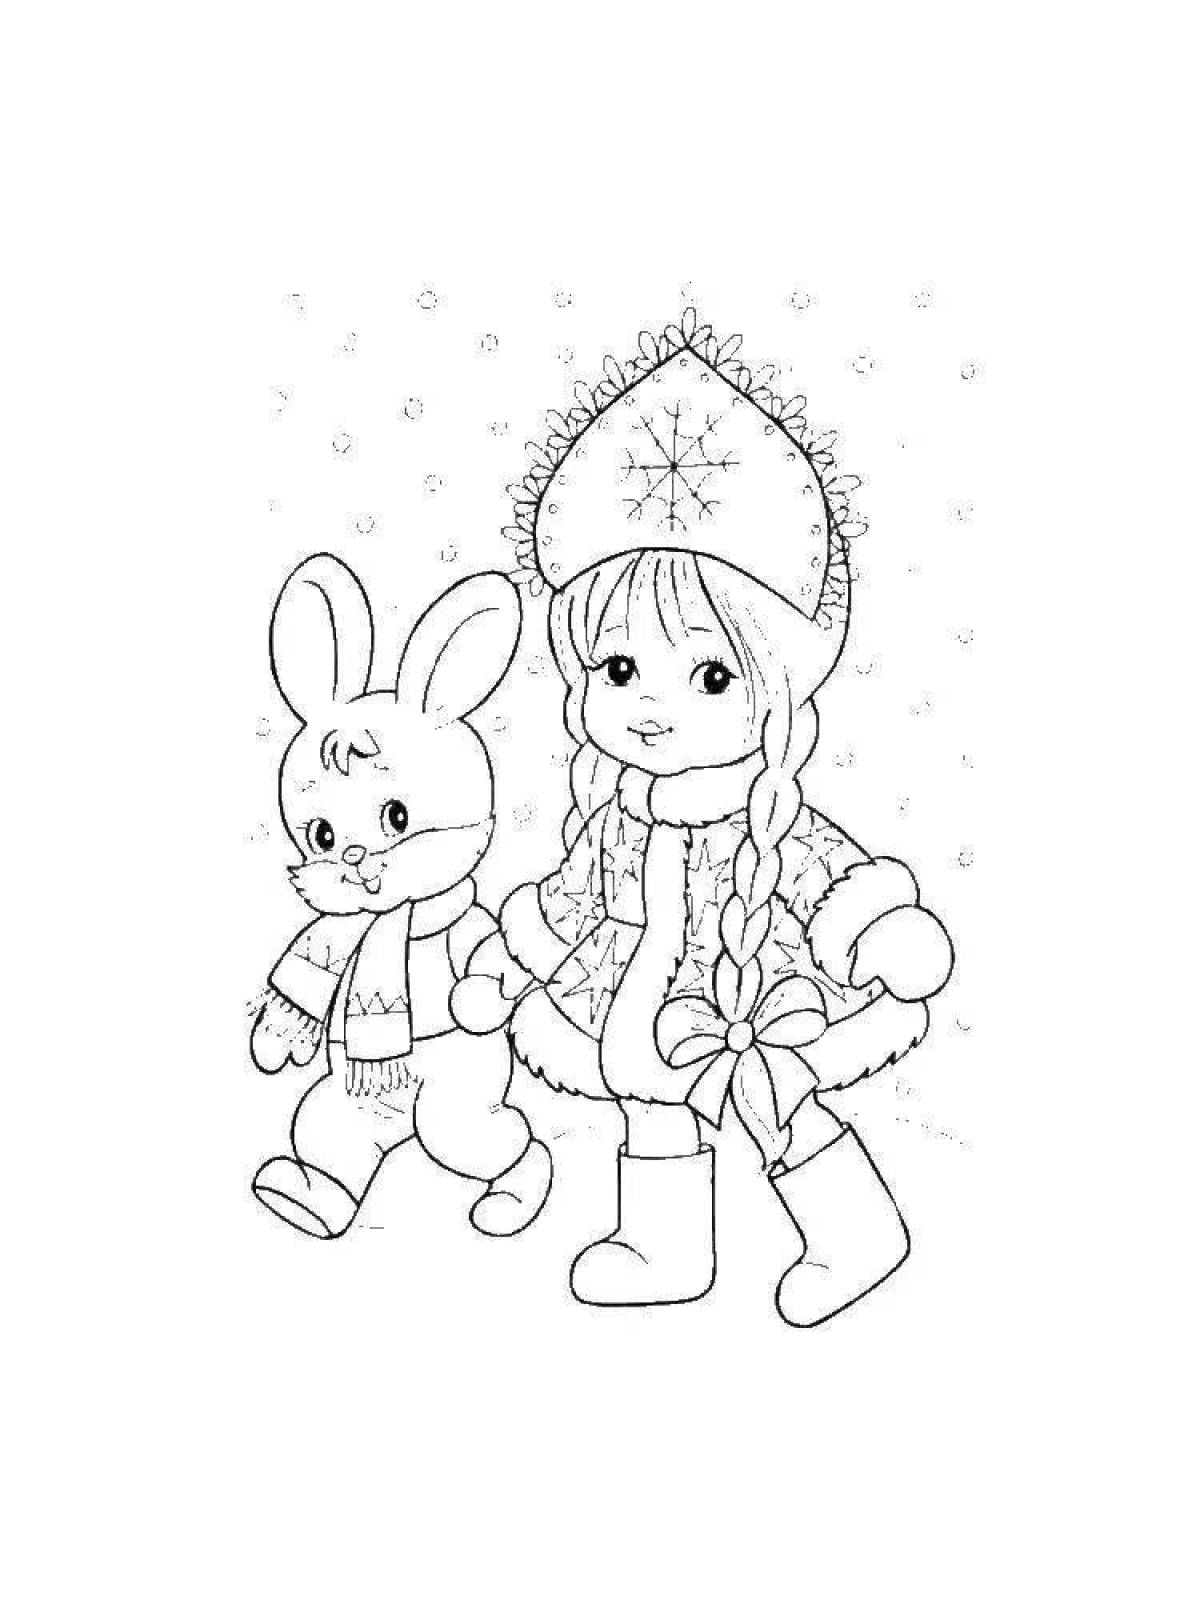 Live Christmas tree and rabbit coloring book